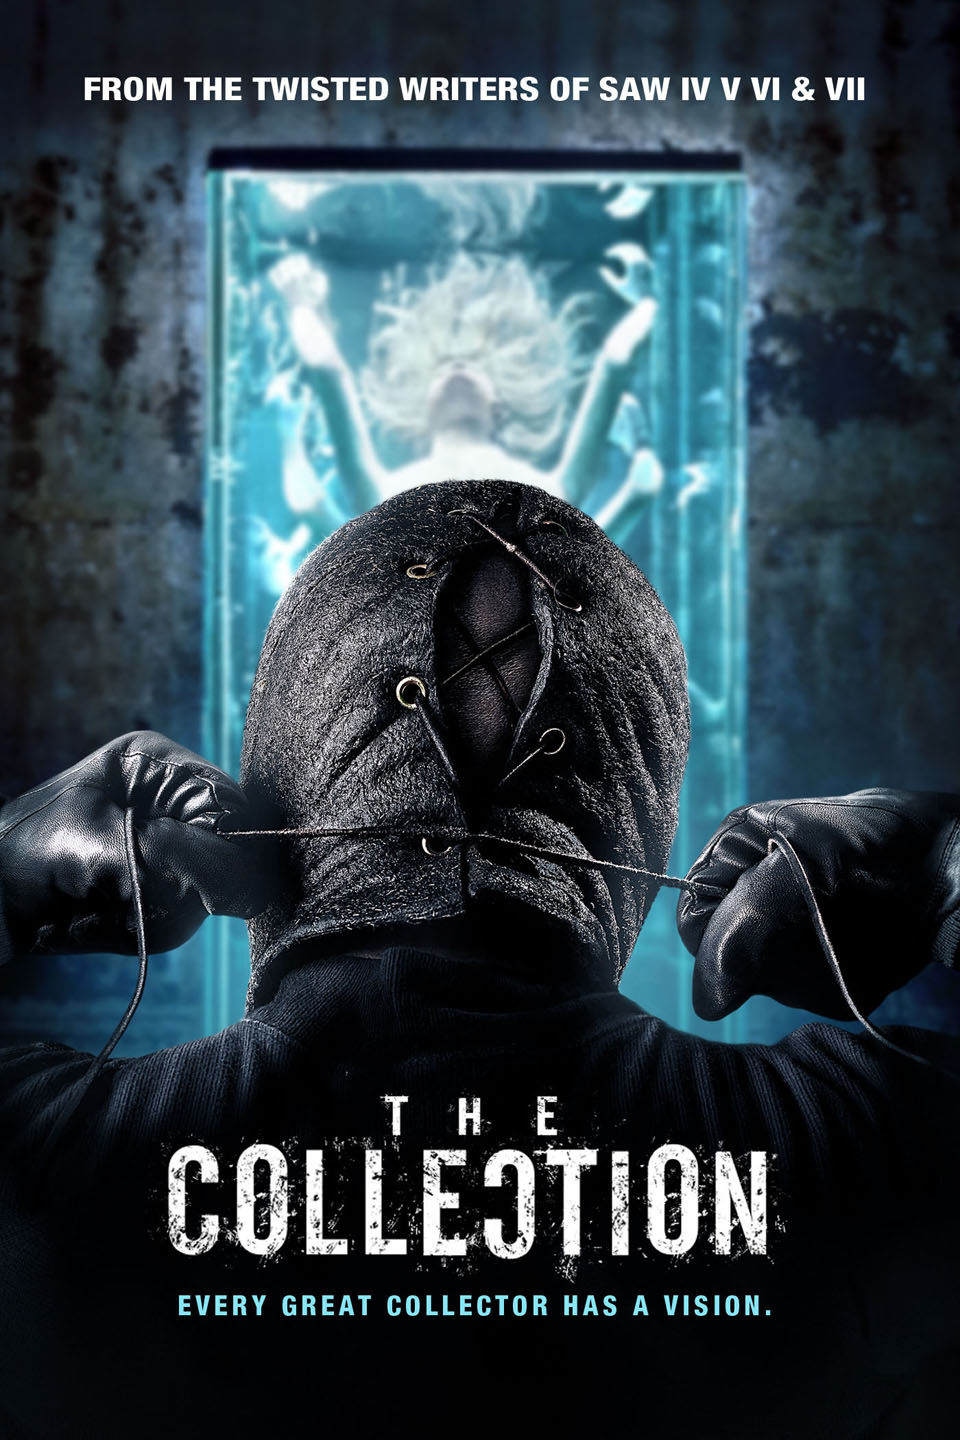 The Collection (film) - Wikipedia